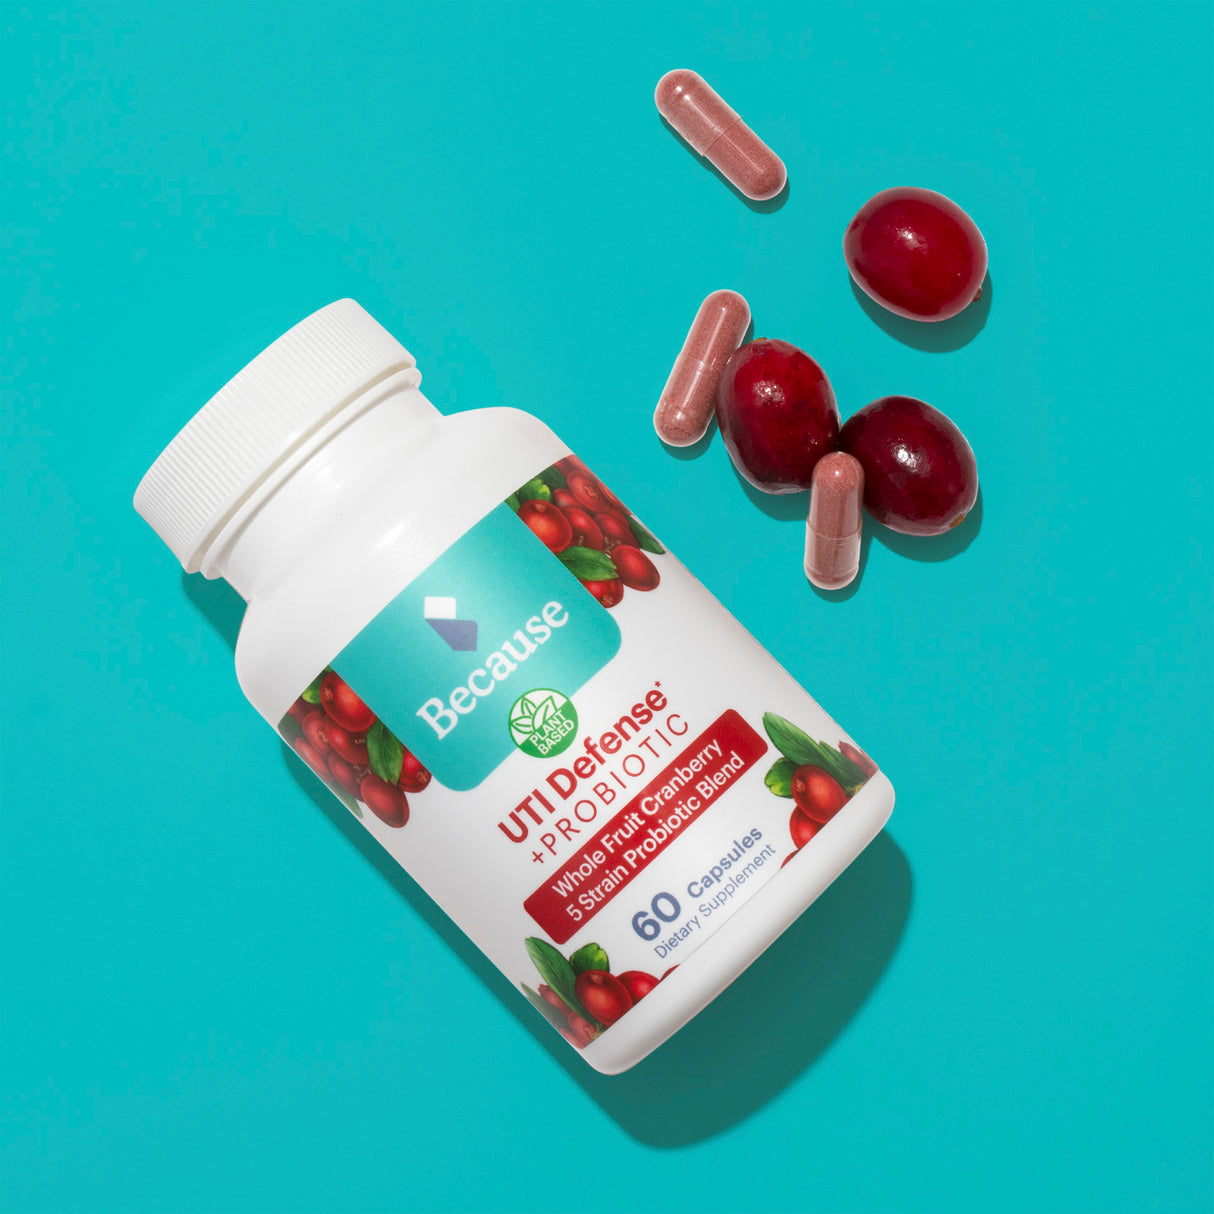 A white supplement bottle with cranberries on the label and red supplements spilling on to a blue surface next to cranberries.